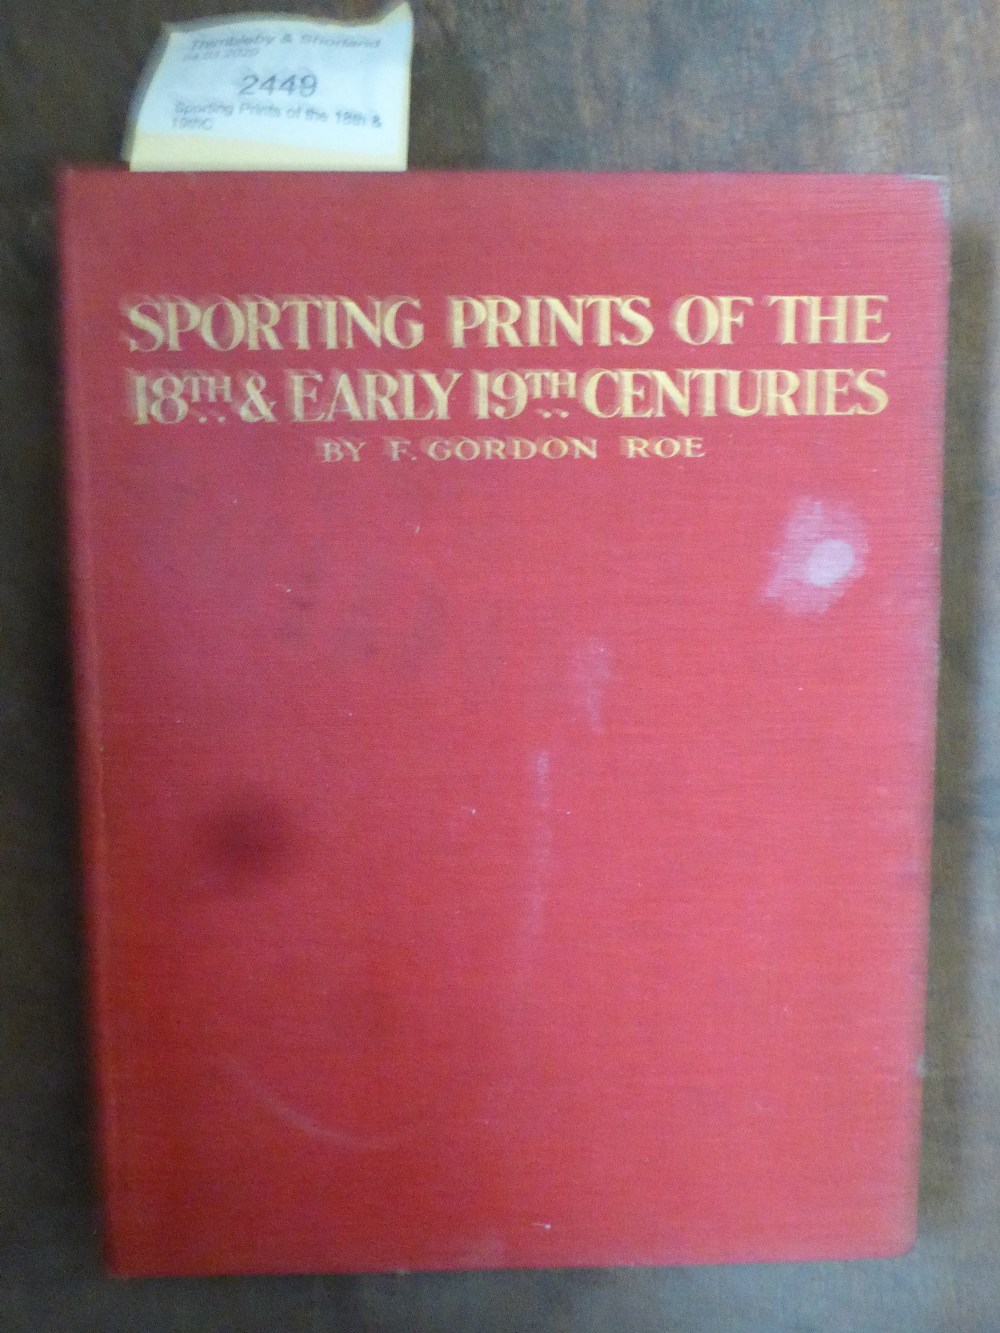 Sporting Prints of the 18th & 19thC by F.Gordon Roe printed in 1927